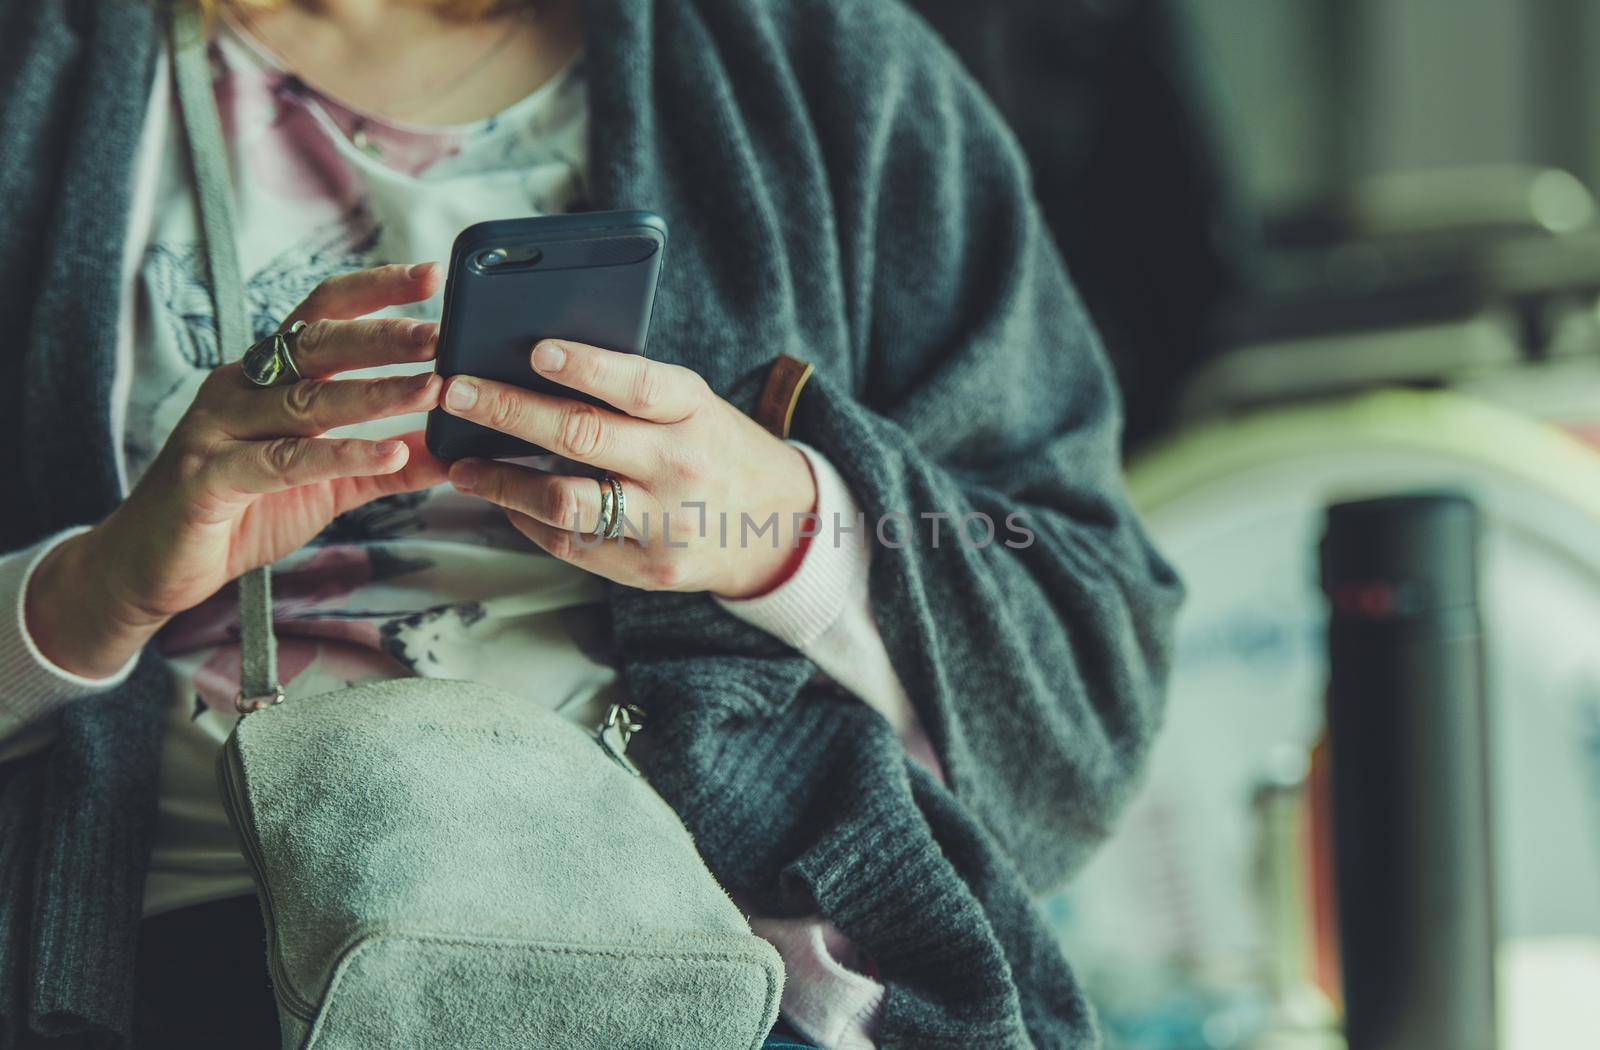 Woman with Smartphone in an Airport Waiting Room by welcomia